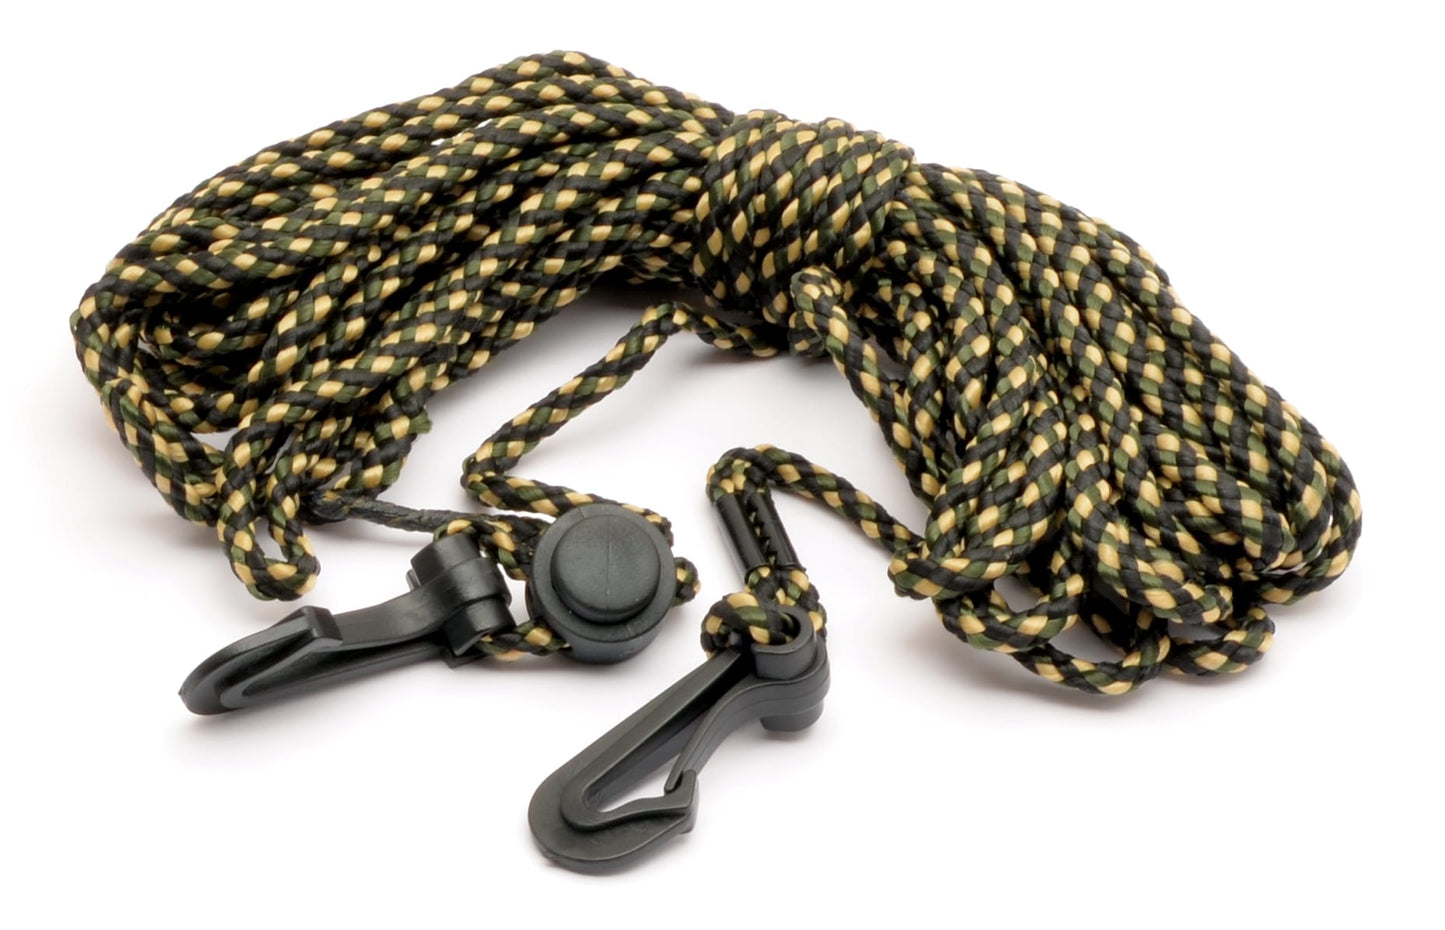 HME - GEAR & BOW LIFT CORD (25FT)